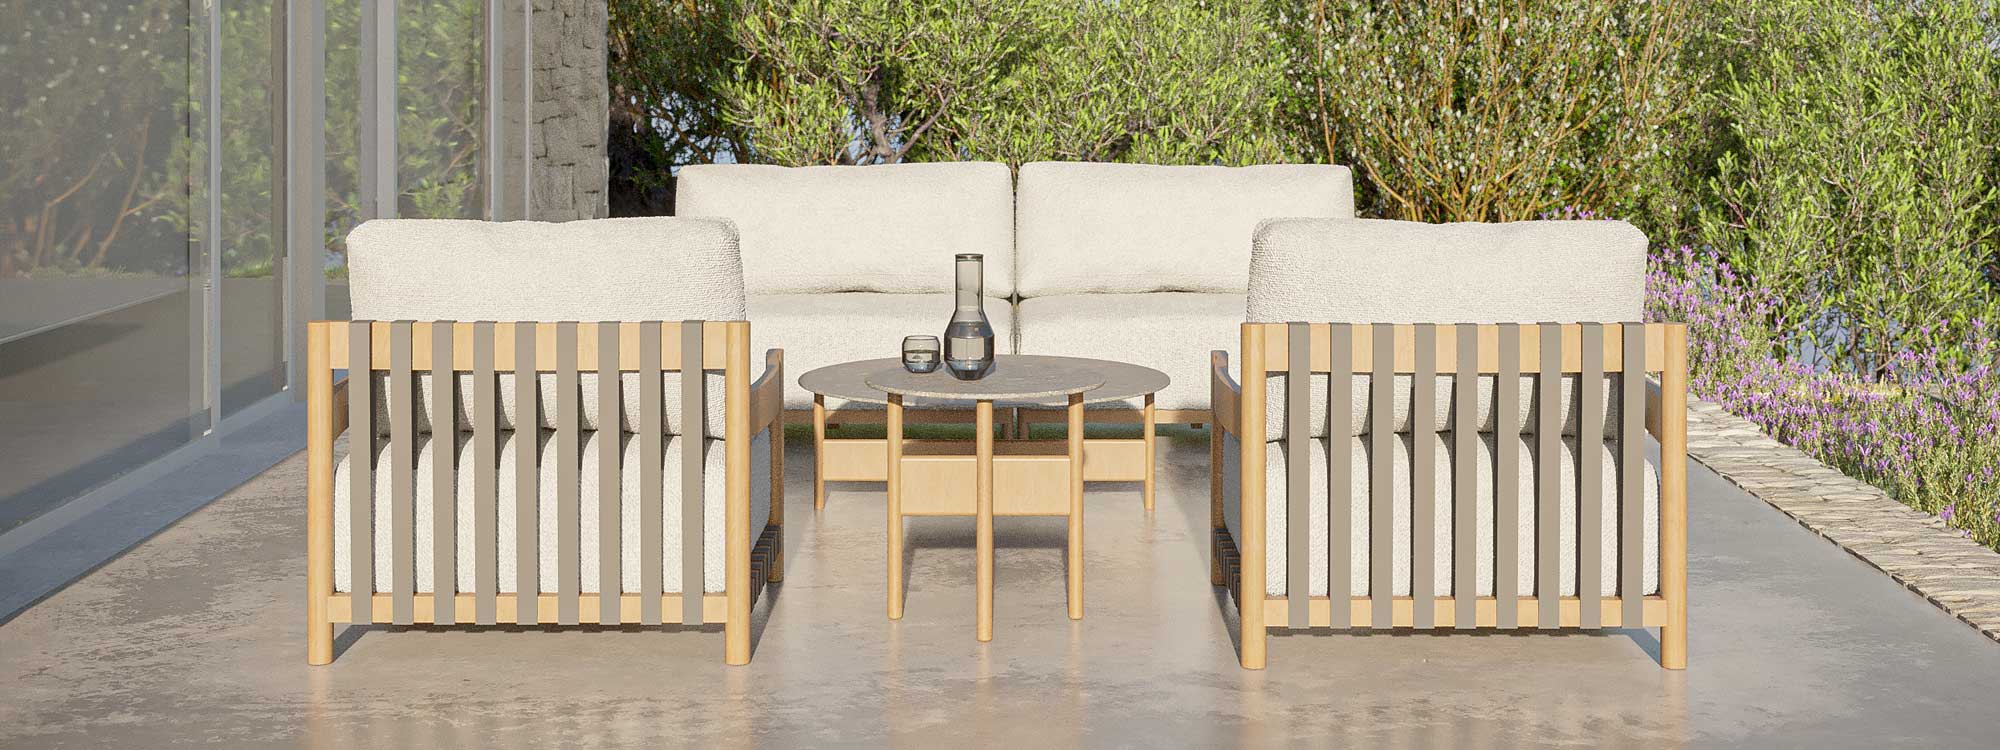 Image of Natura iroko garden sofa and lounge chairs with Scandinavian-inspired design by Oiside